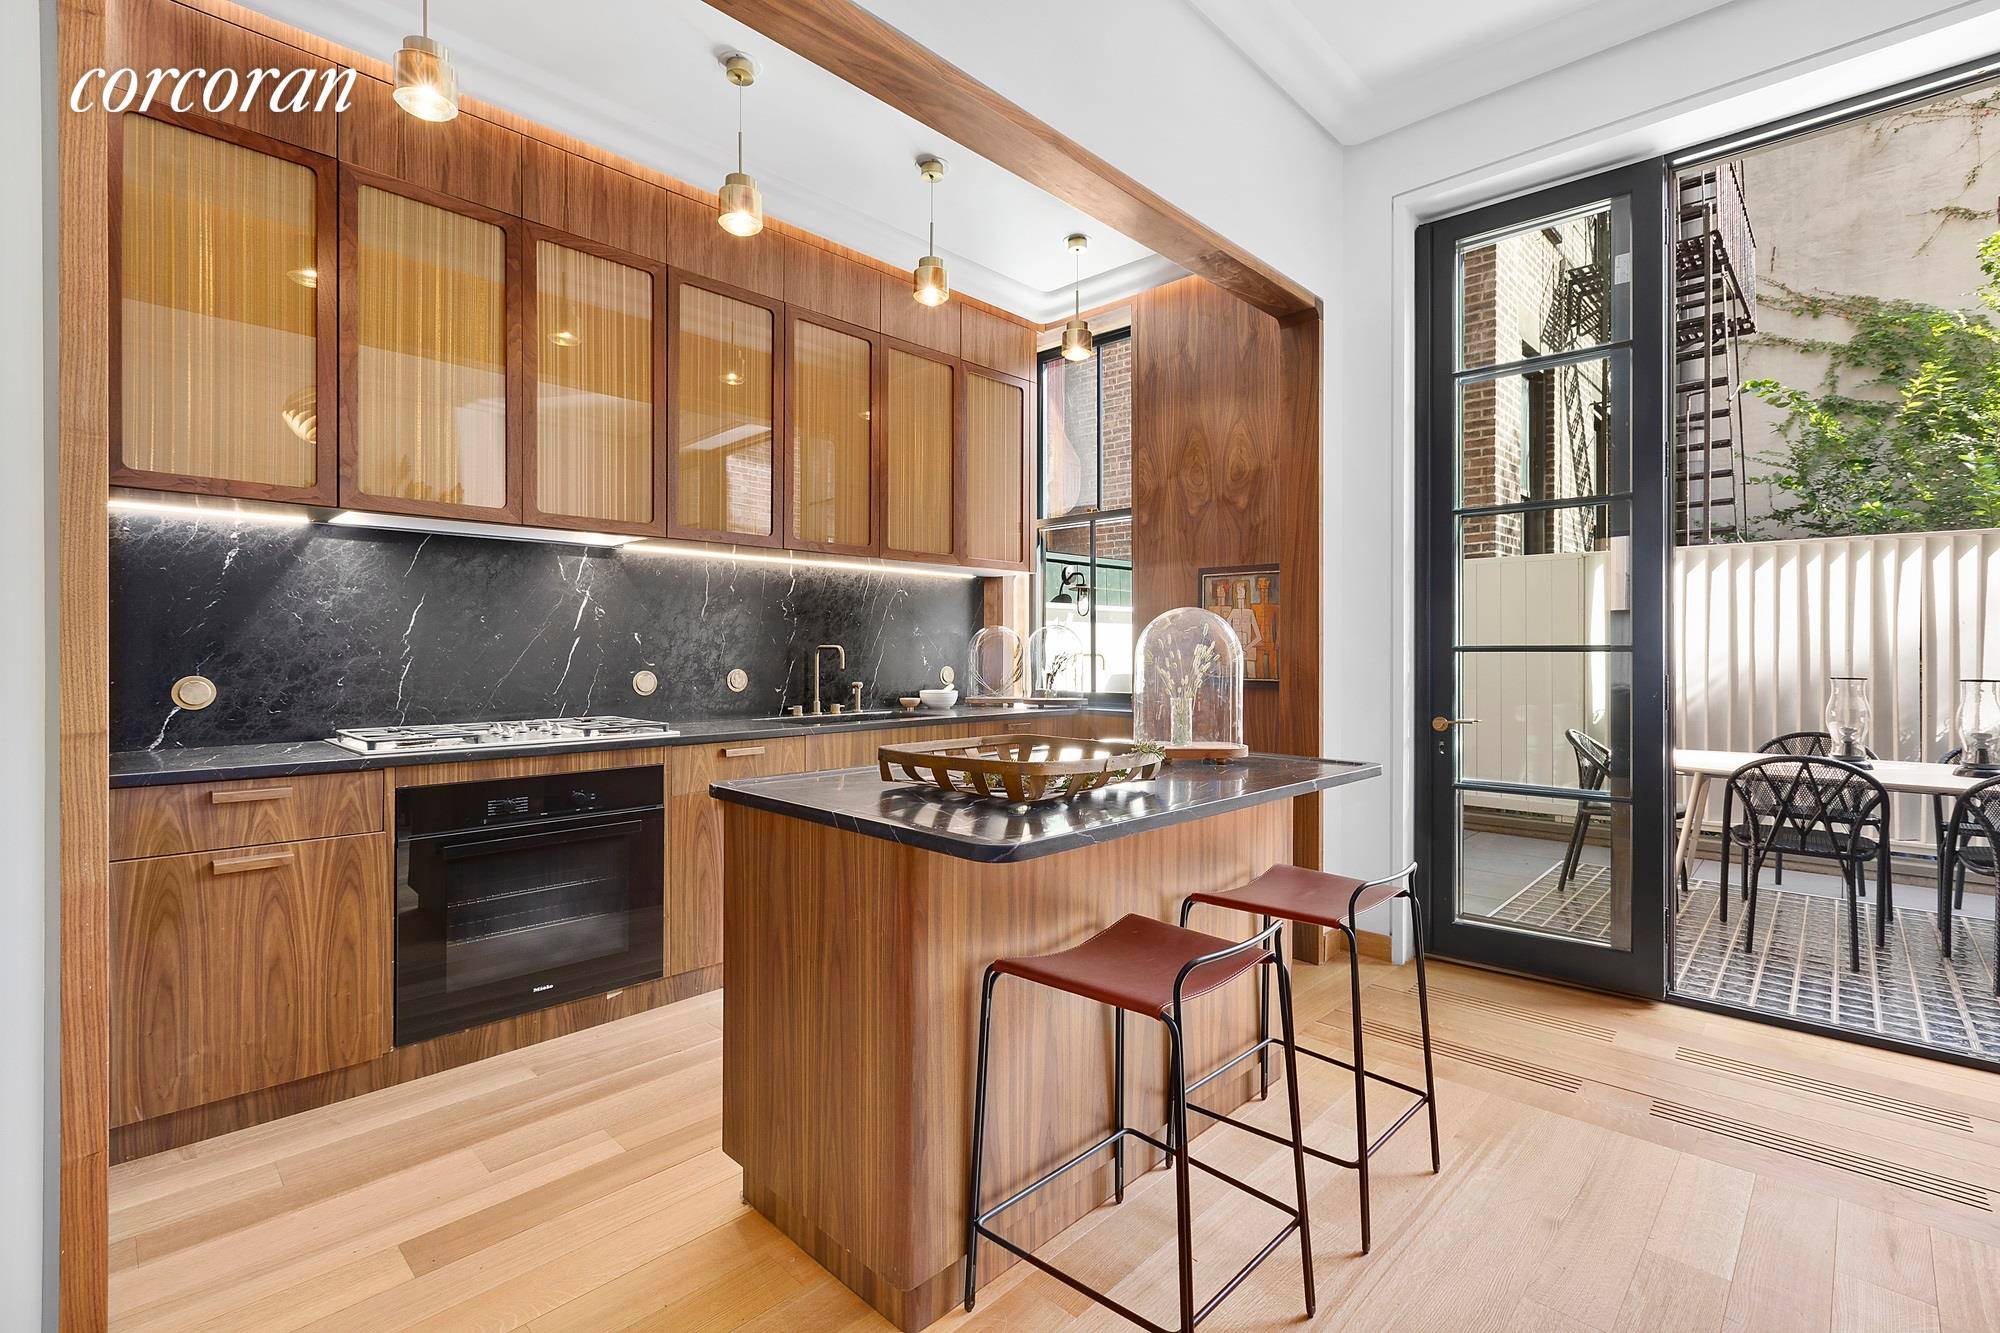 Incredible opportunity to be the first to live in this brand new gut renovated townhouse on highly coveted West 4th Street.